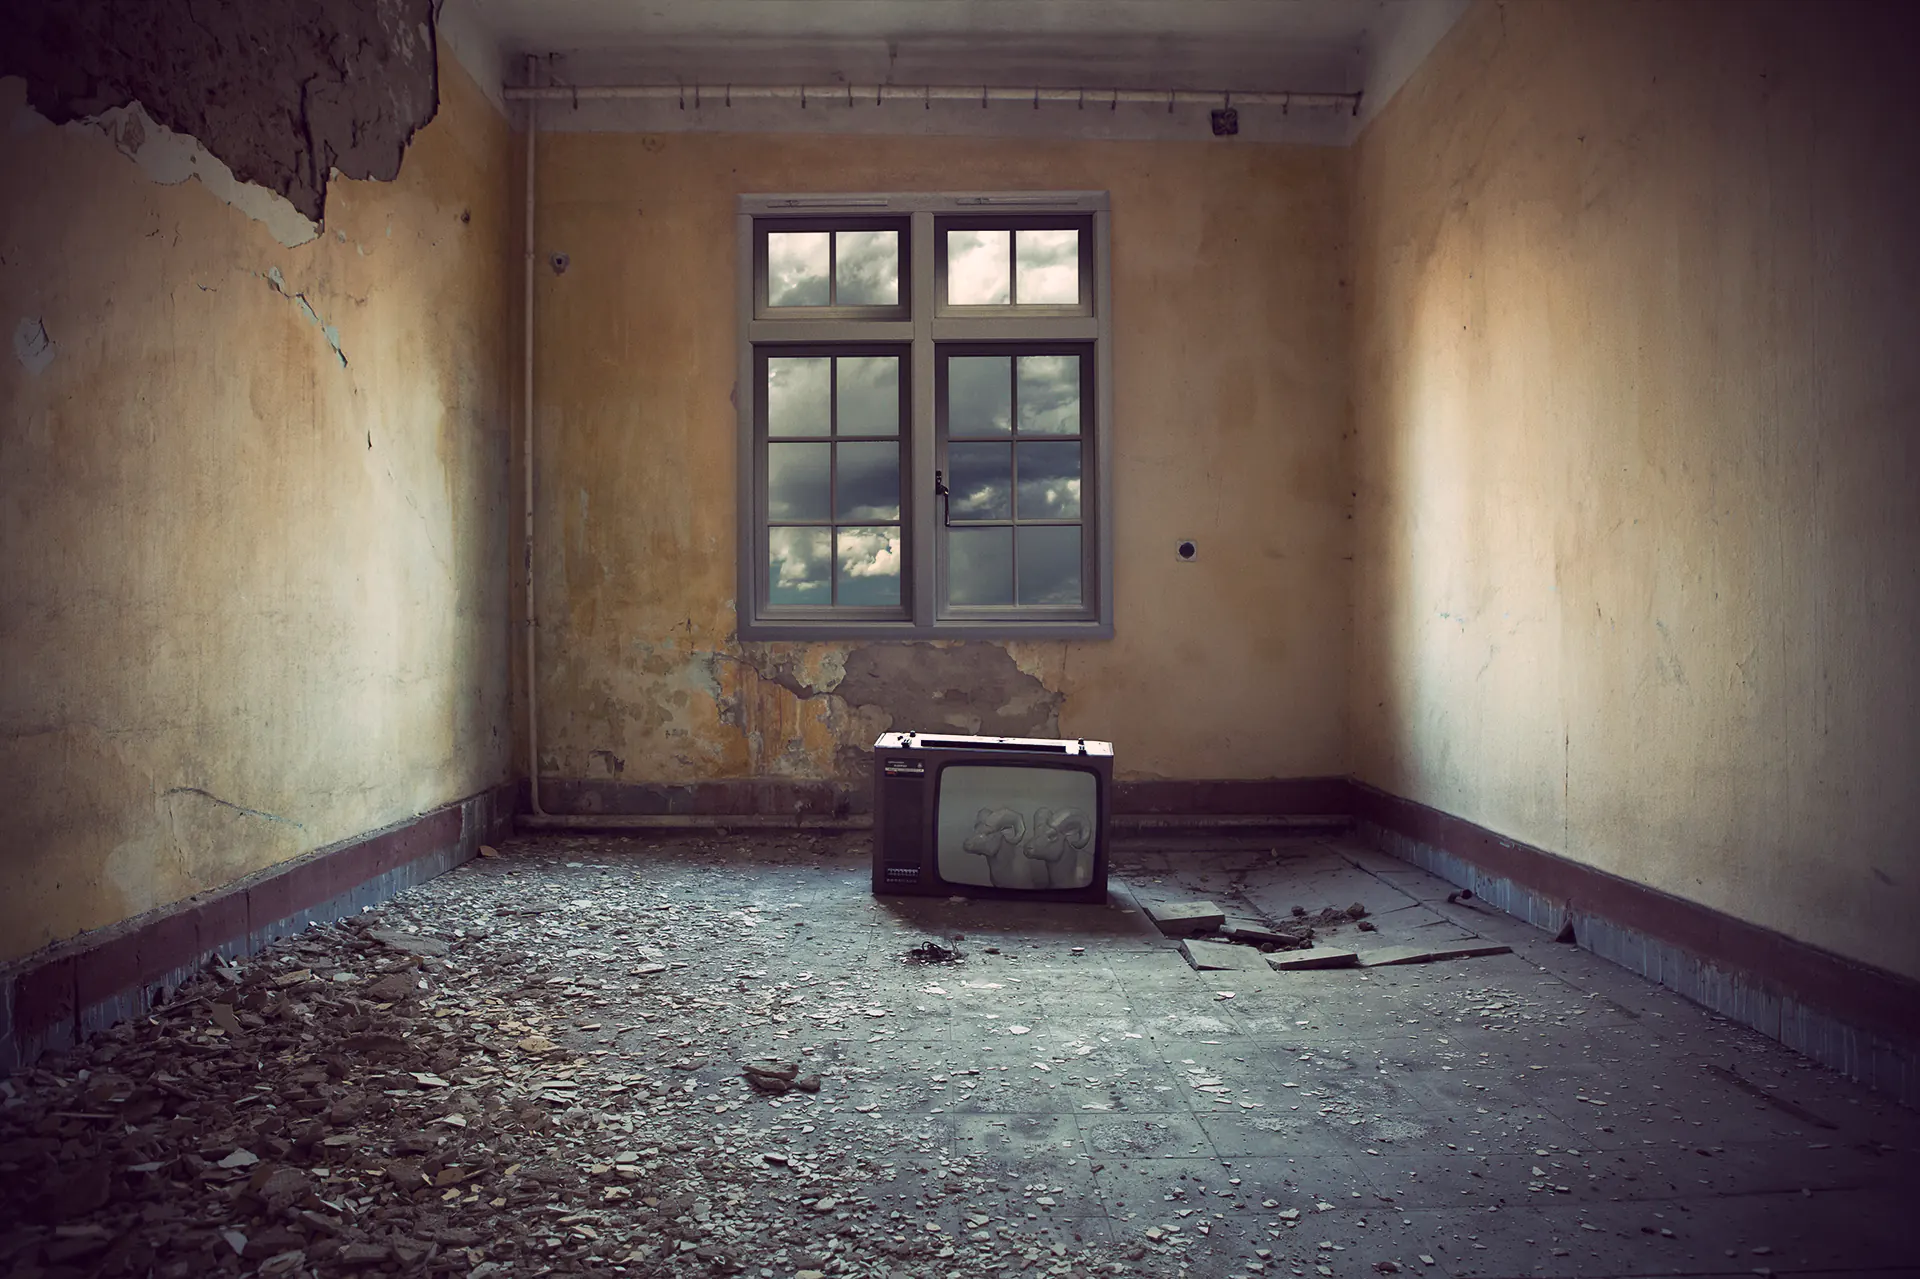 A television in an empty, dilapidated room. On the screen you can see two rams built from polygons.